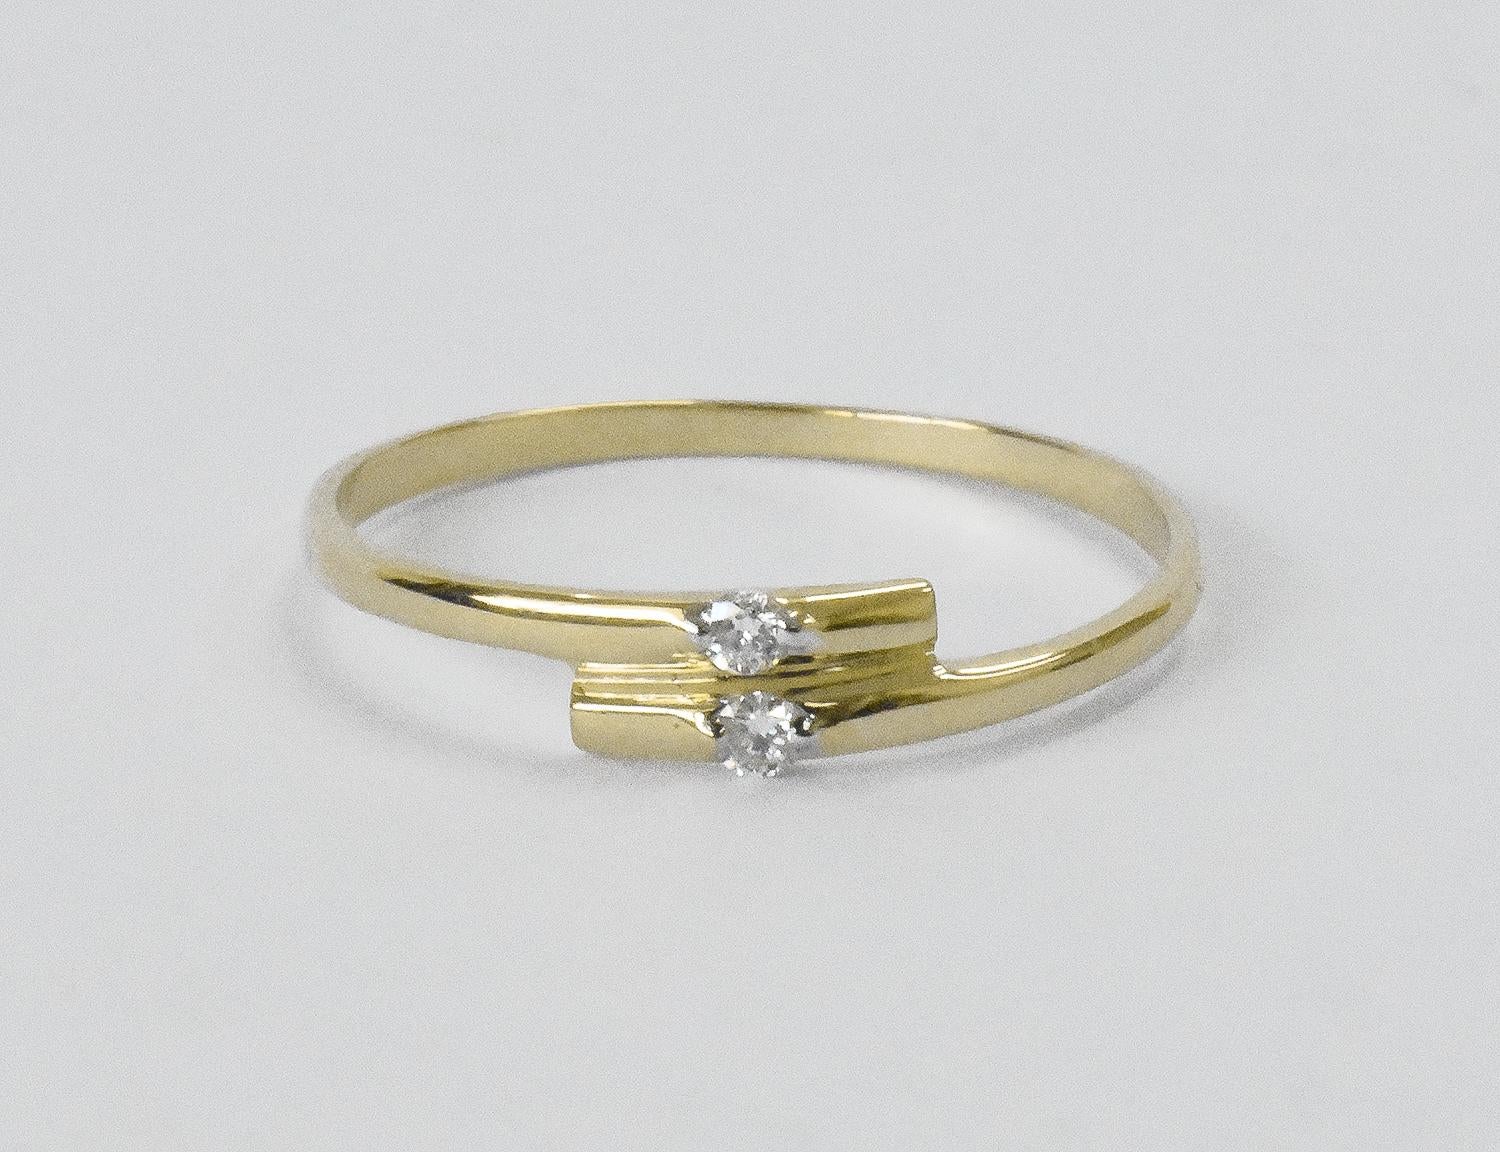 For Sale:  14k Gold Double Diamond Ring Dual Diamond Ring Stacking Ring 5